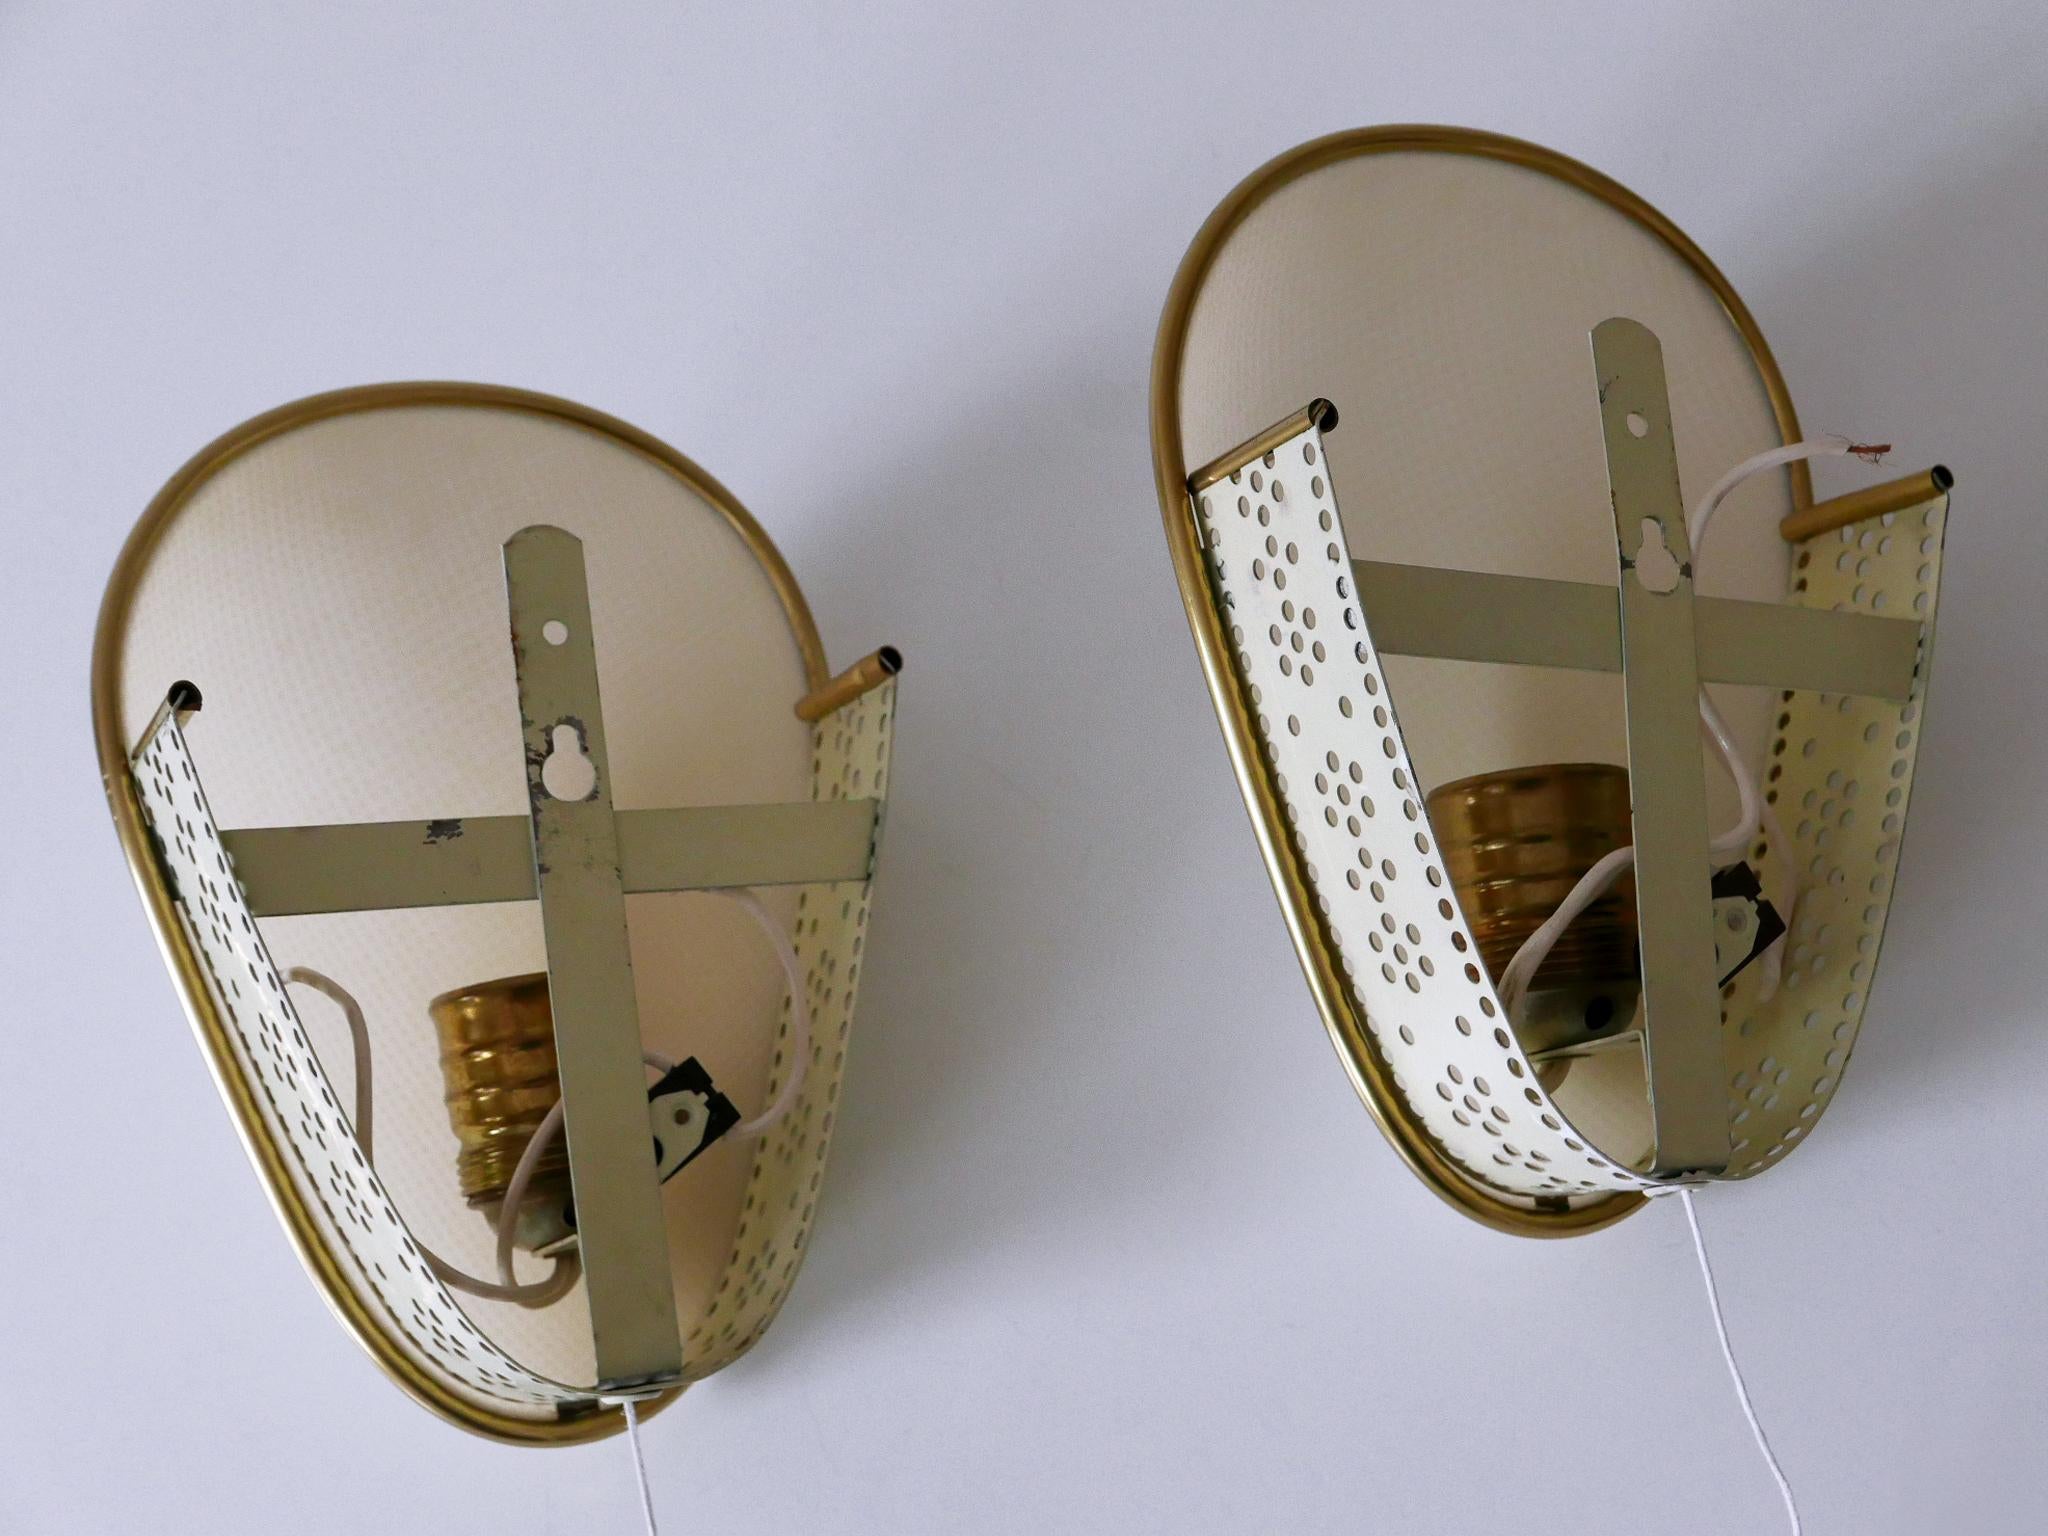 Set of Two Rare & Elegant Mid-Century Modern Sconces or Wall Lamps Germany 1950s For Sale 14